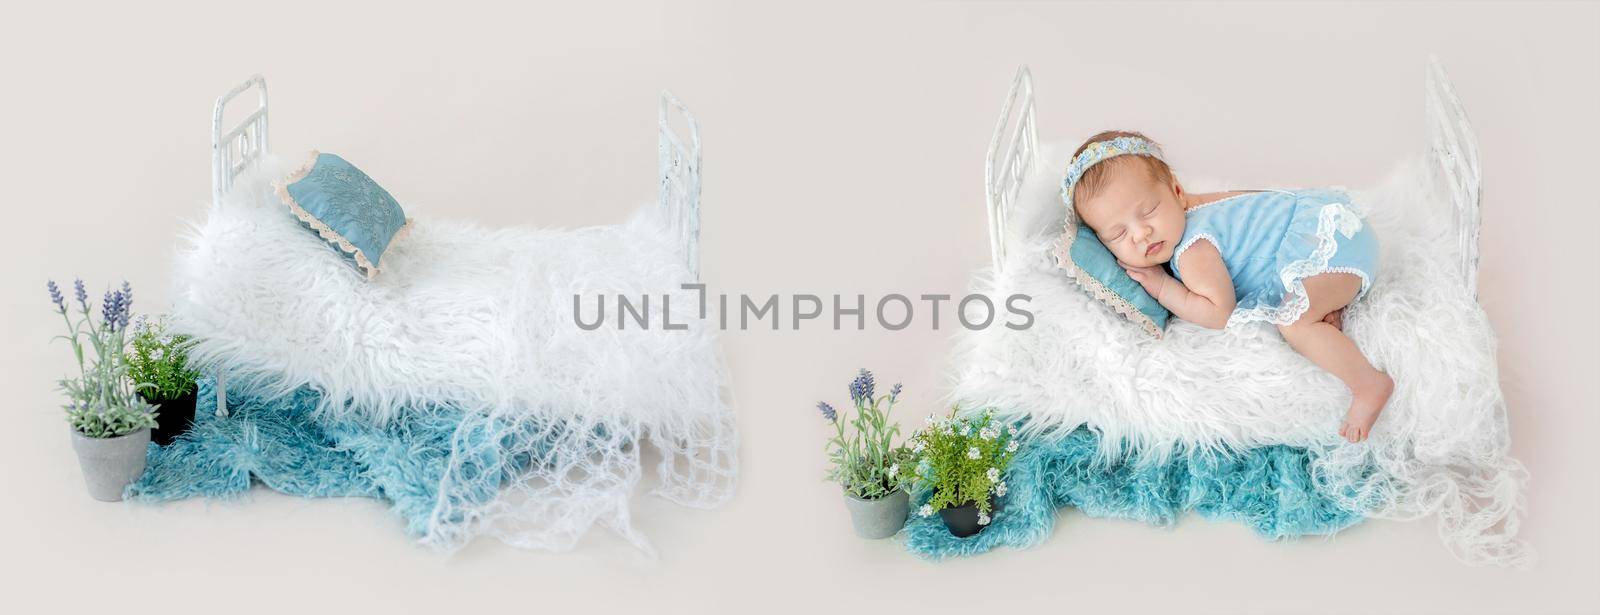 Composition with newborn baby portrait and empty furniture by tan4ikk1